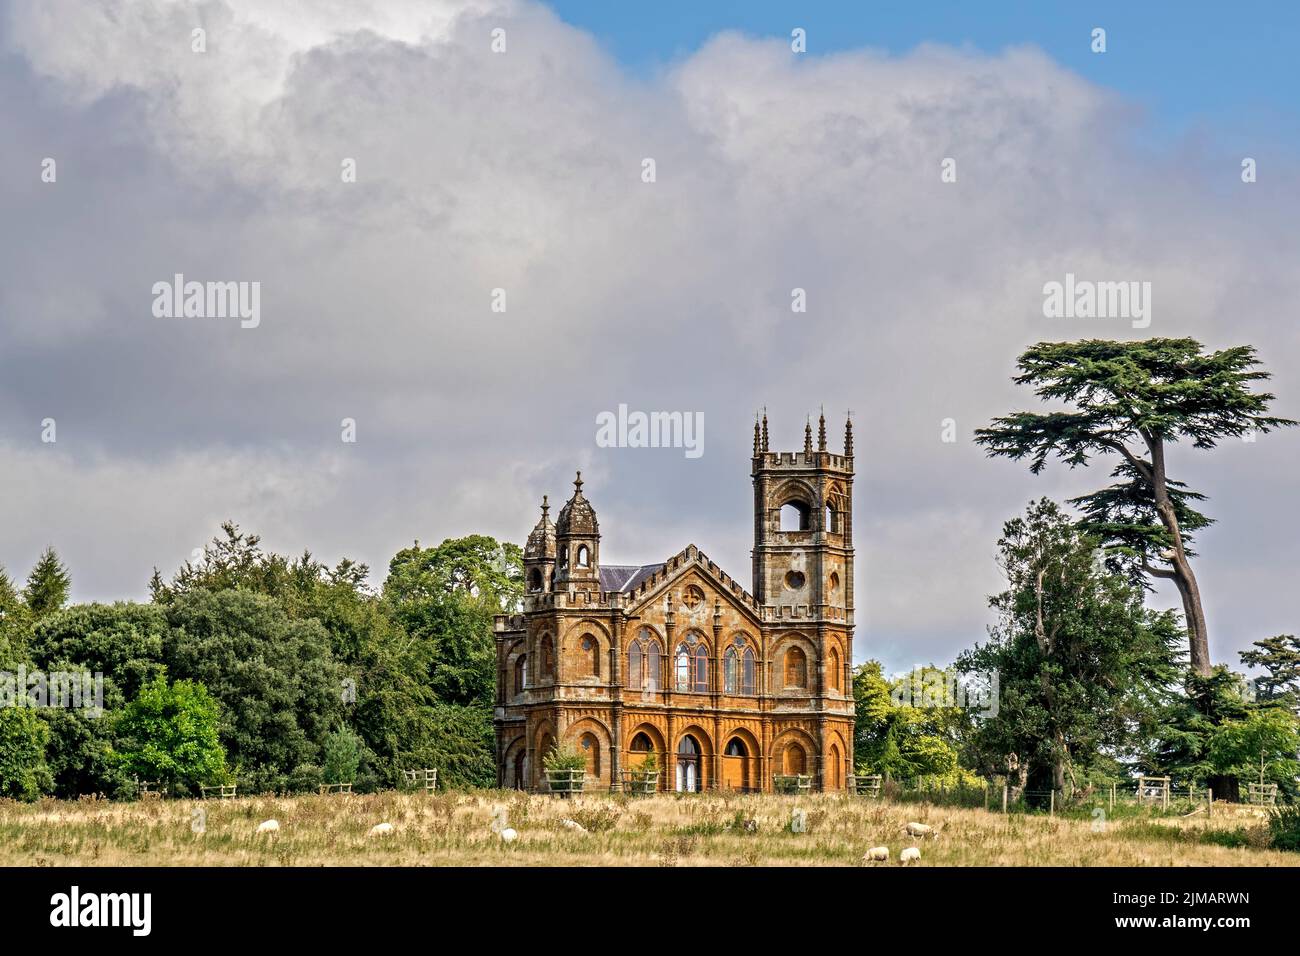 The Gothic Temple On The Hill Stowe Gardens Buckinghamshire UK Stock Photo